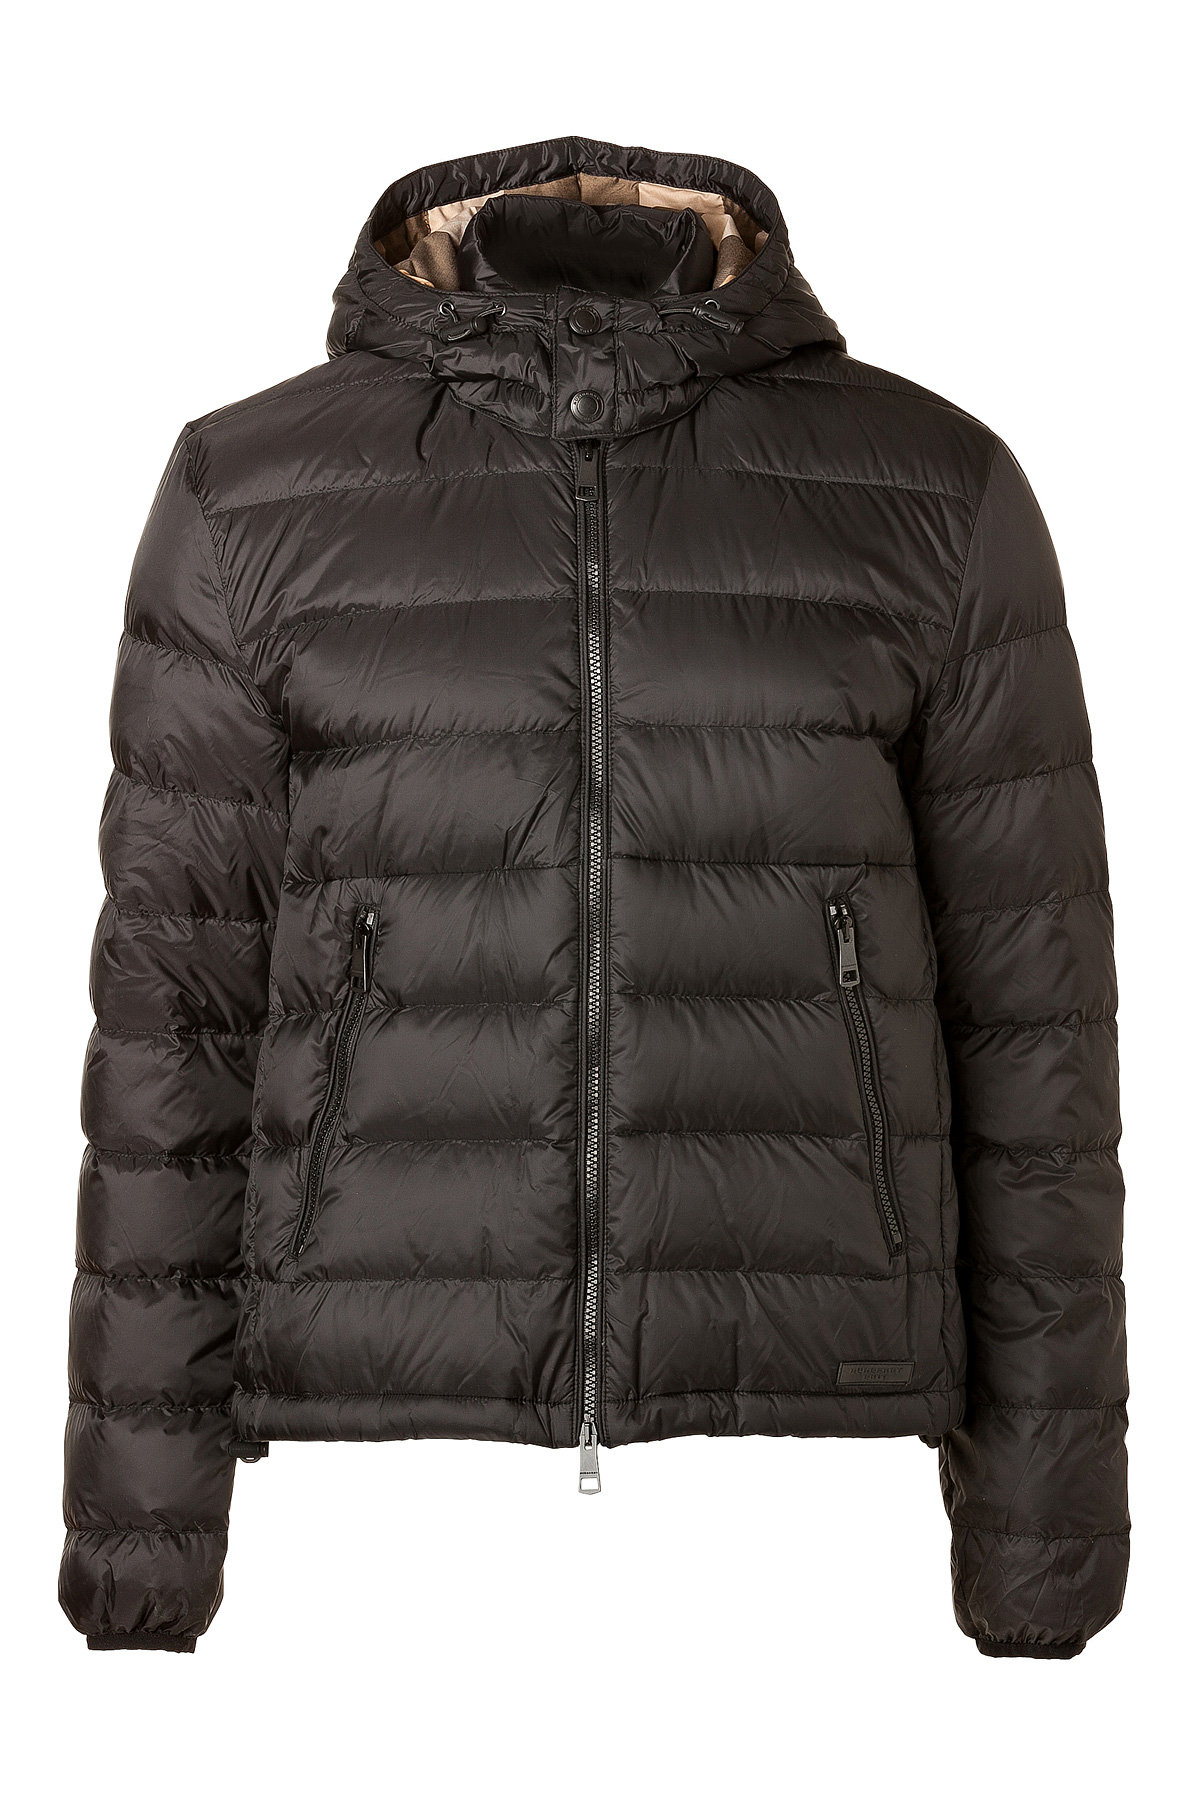 Lyst - Burberry Brit Mitchson Quilted Down Jacket in Brown for Men